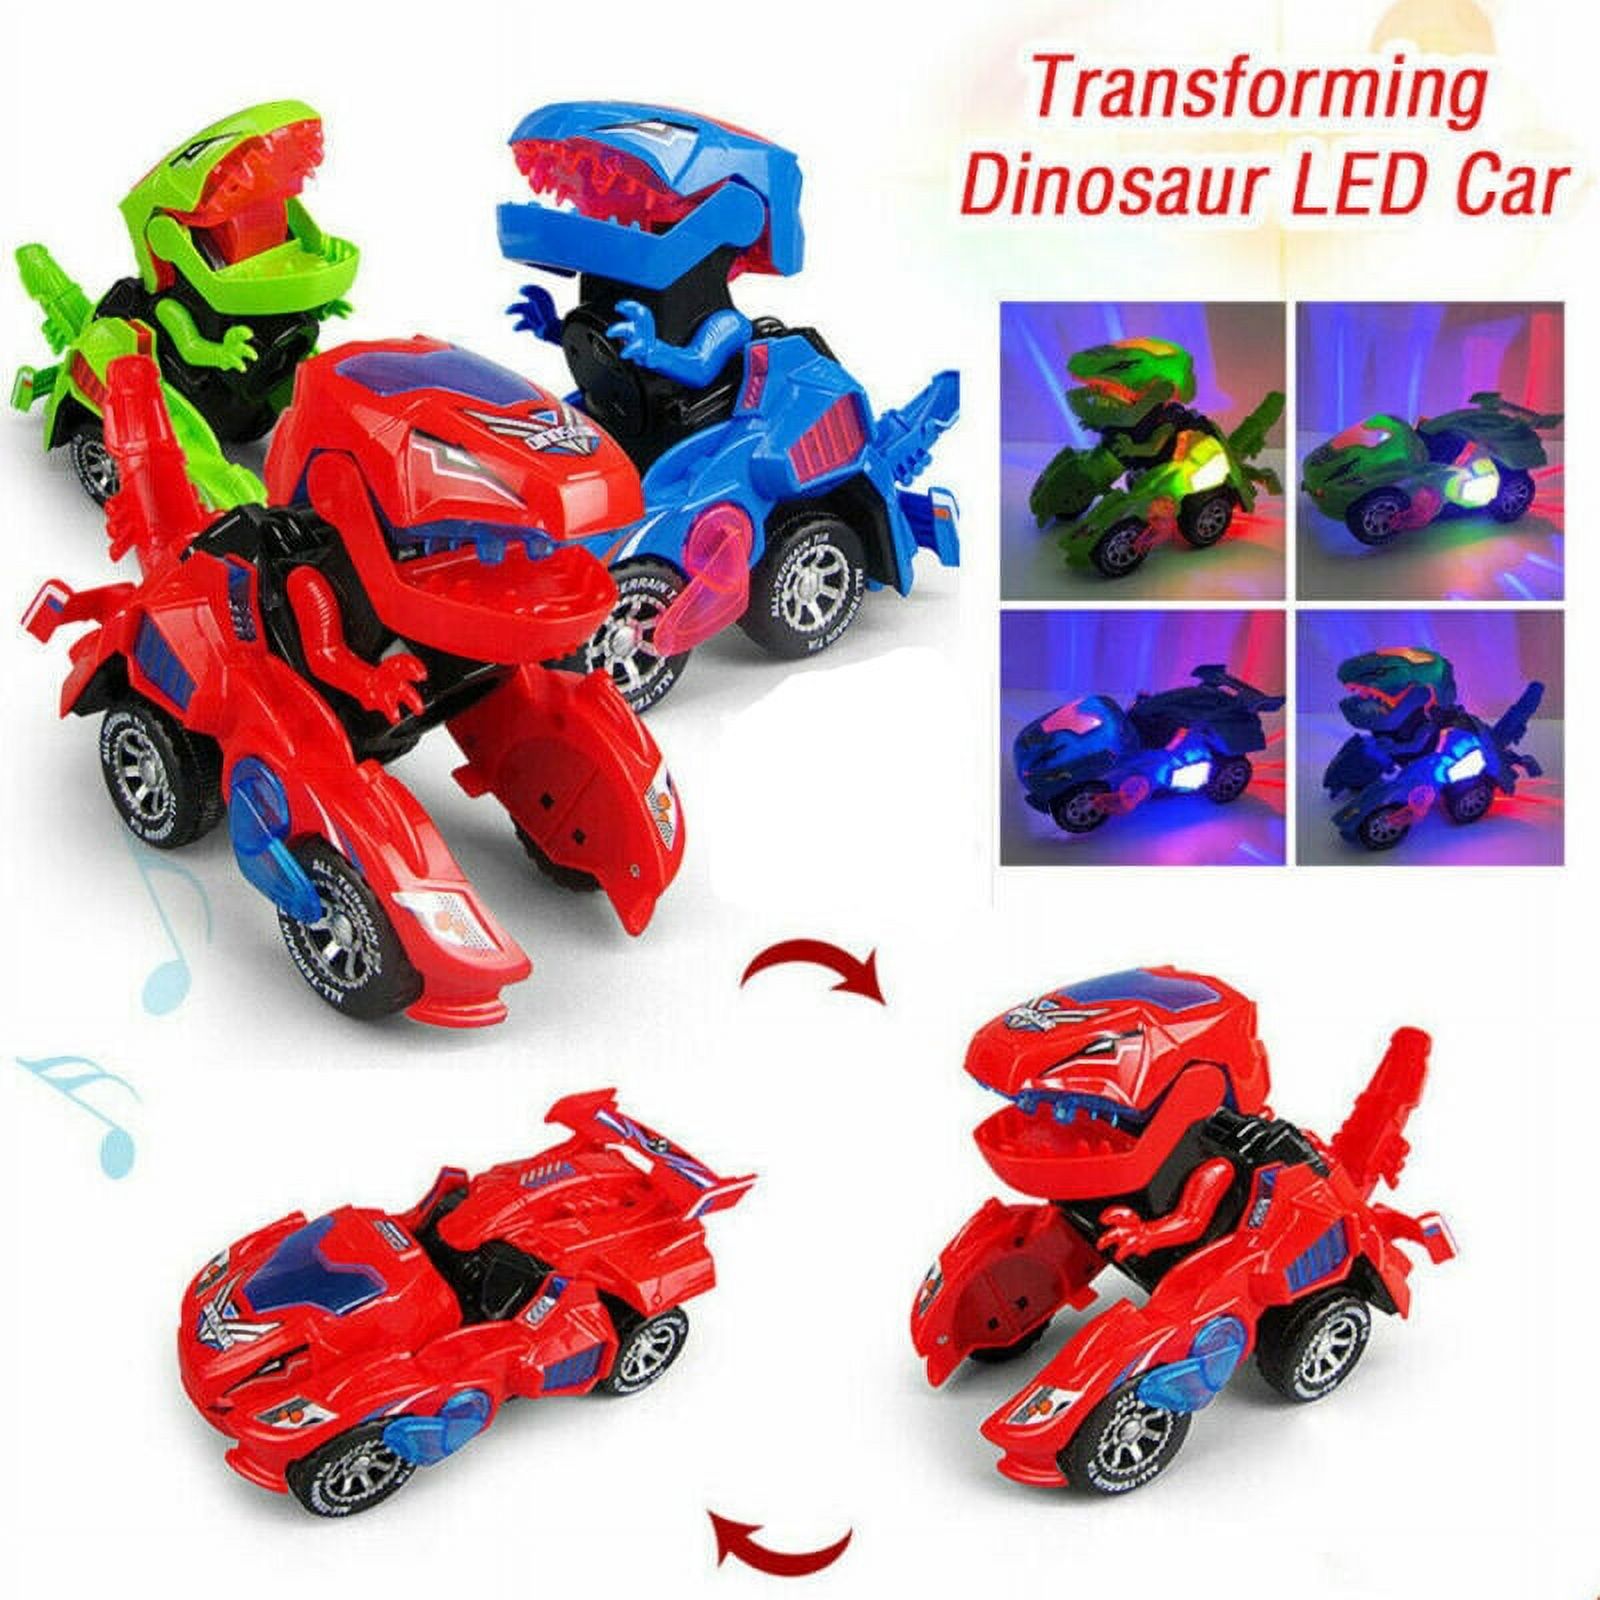 Dinosaur Toys LED Cars Combined Into One, Dinosaur Cars Toys with LED Light Sound Dinosaur Toys Best Toy Gift Kids Ages 3yr – 9yr, Boys Girls Toddlers Birthday Holiday Xmas Easter Gift - image 2 of 8